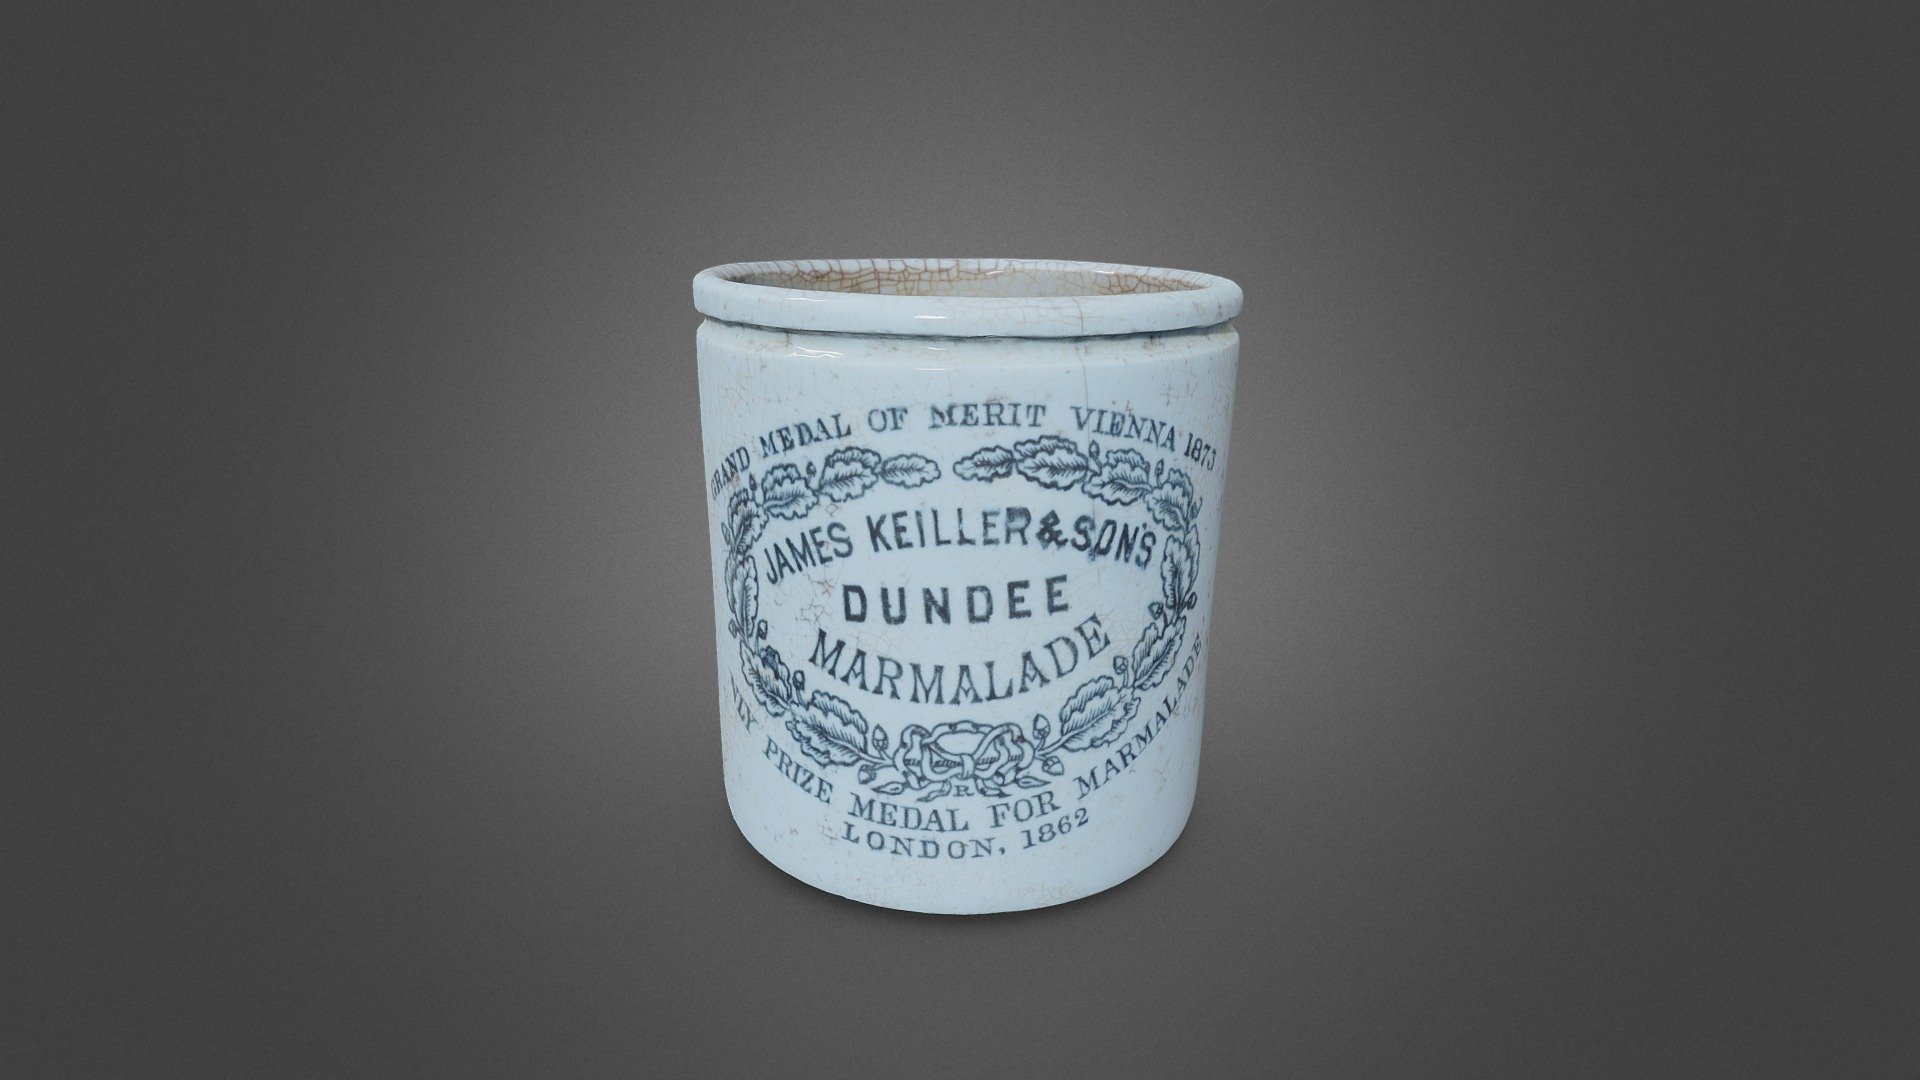 19th century marmalade jar. 

https://en.wikipedia.org/wiki/Keiller%27s_marmalade

Photography and Model Credit: Charlotte Sargent - Keiller's Marmalade Jar - 3D model by Archaeology, Classics and Egyptology at Liverpool (@LivAncWorlds) 3d model